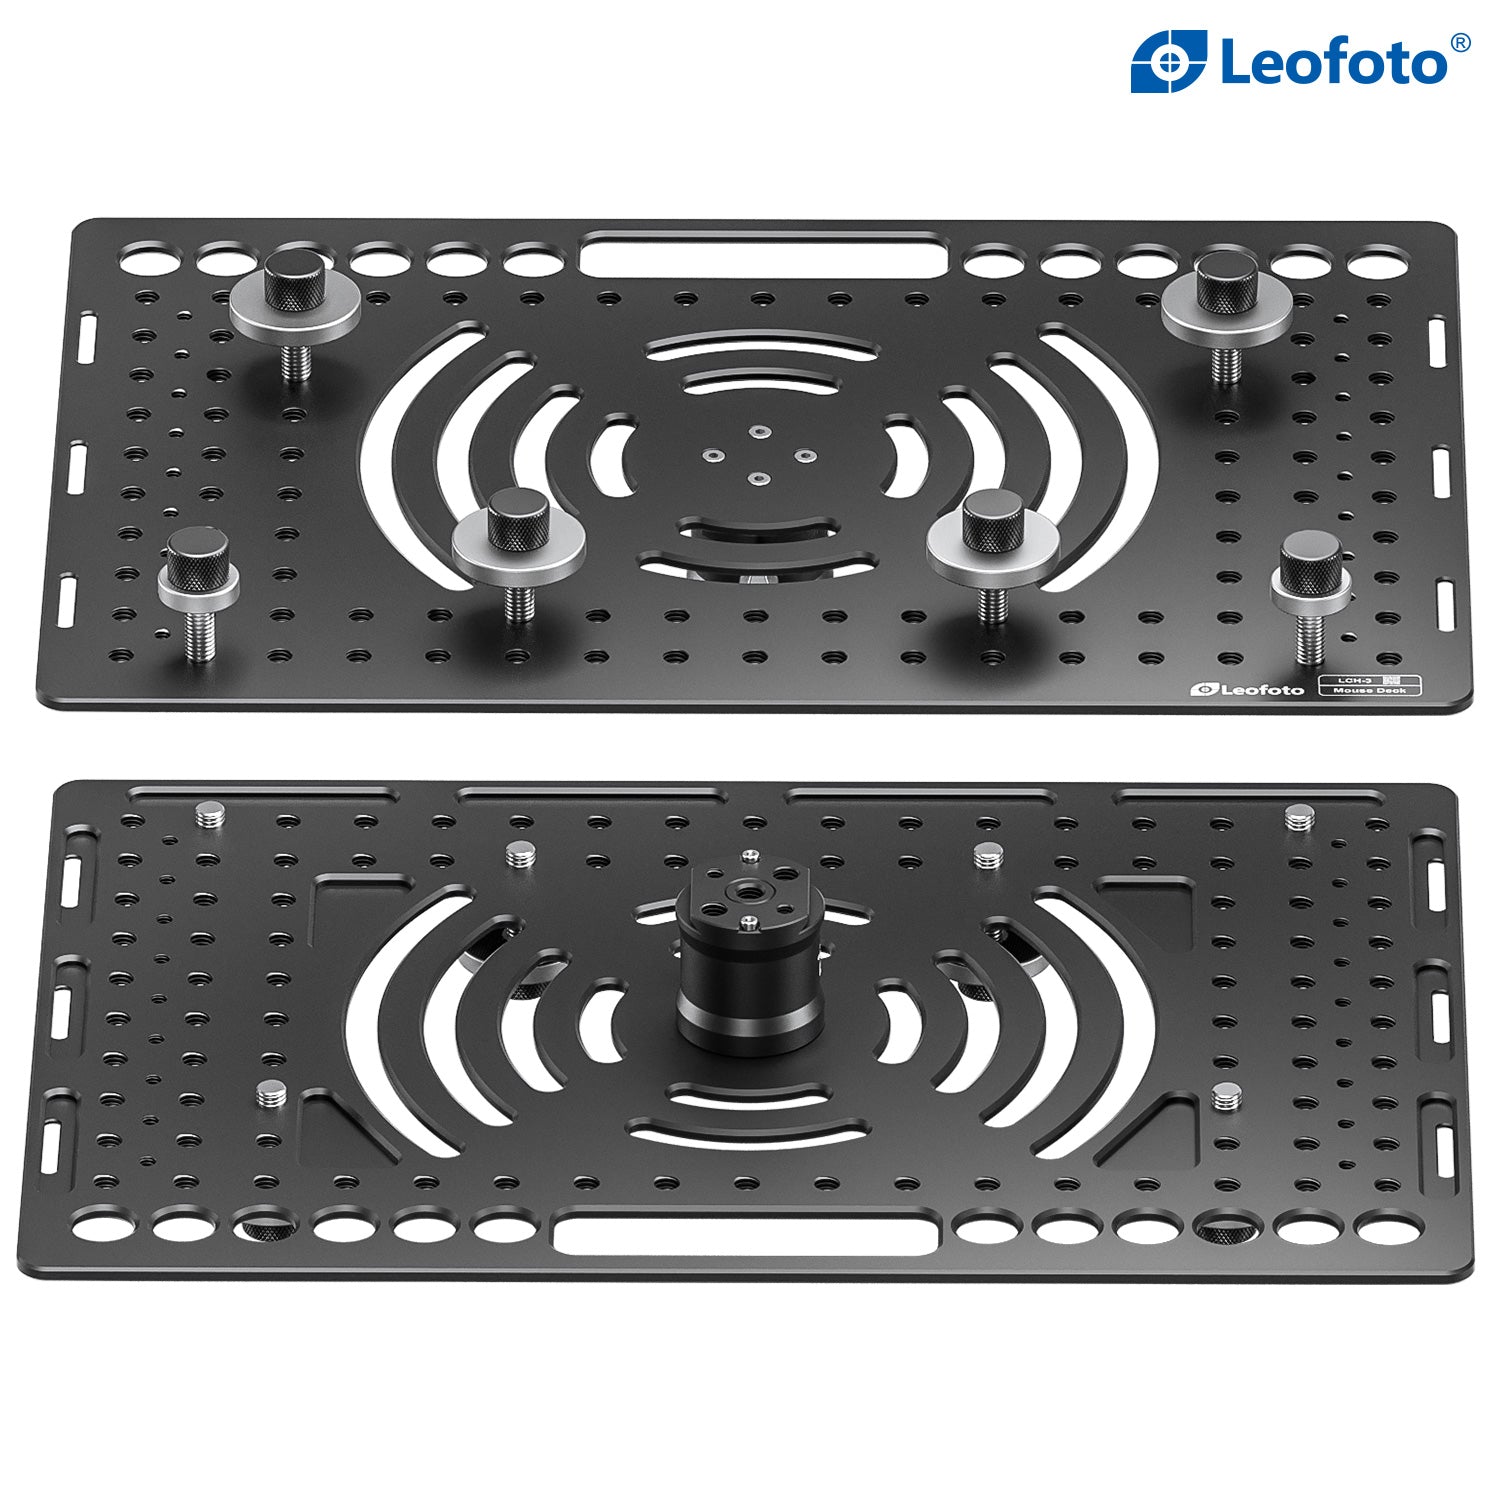 Leofoto LCH-3/LCH-3S Ultimate Laptop Tray (Tray Only) | 1/4" and 3/8" Compatible